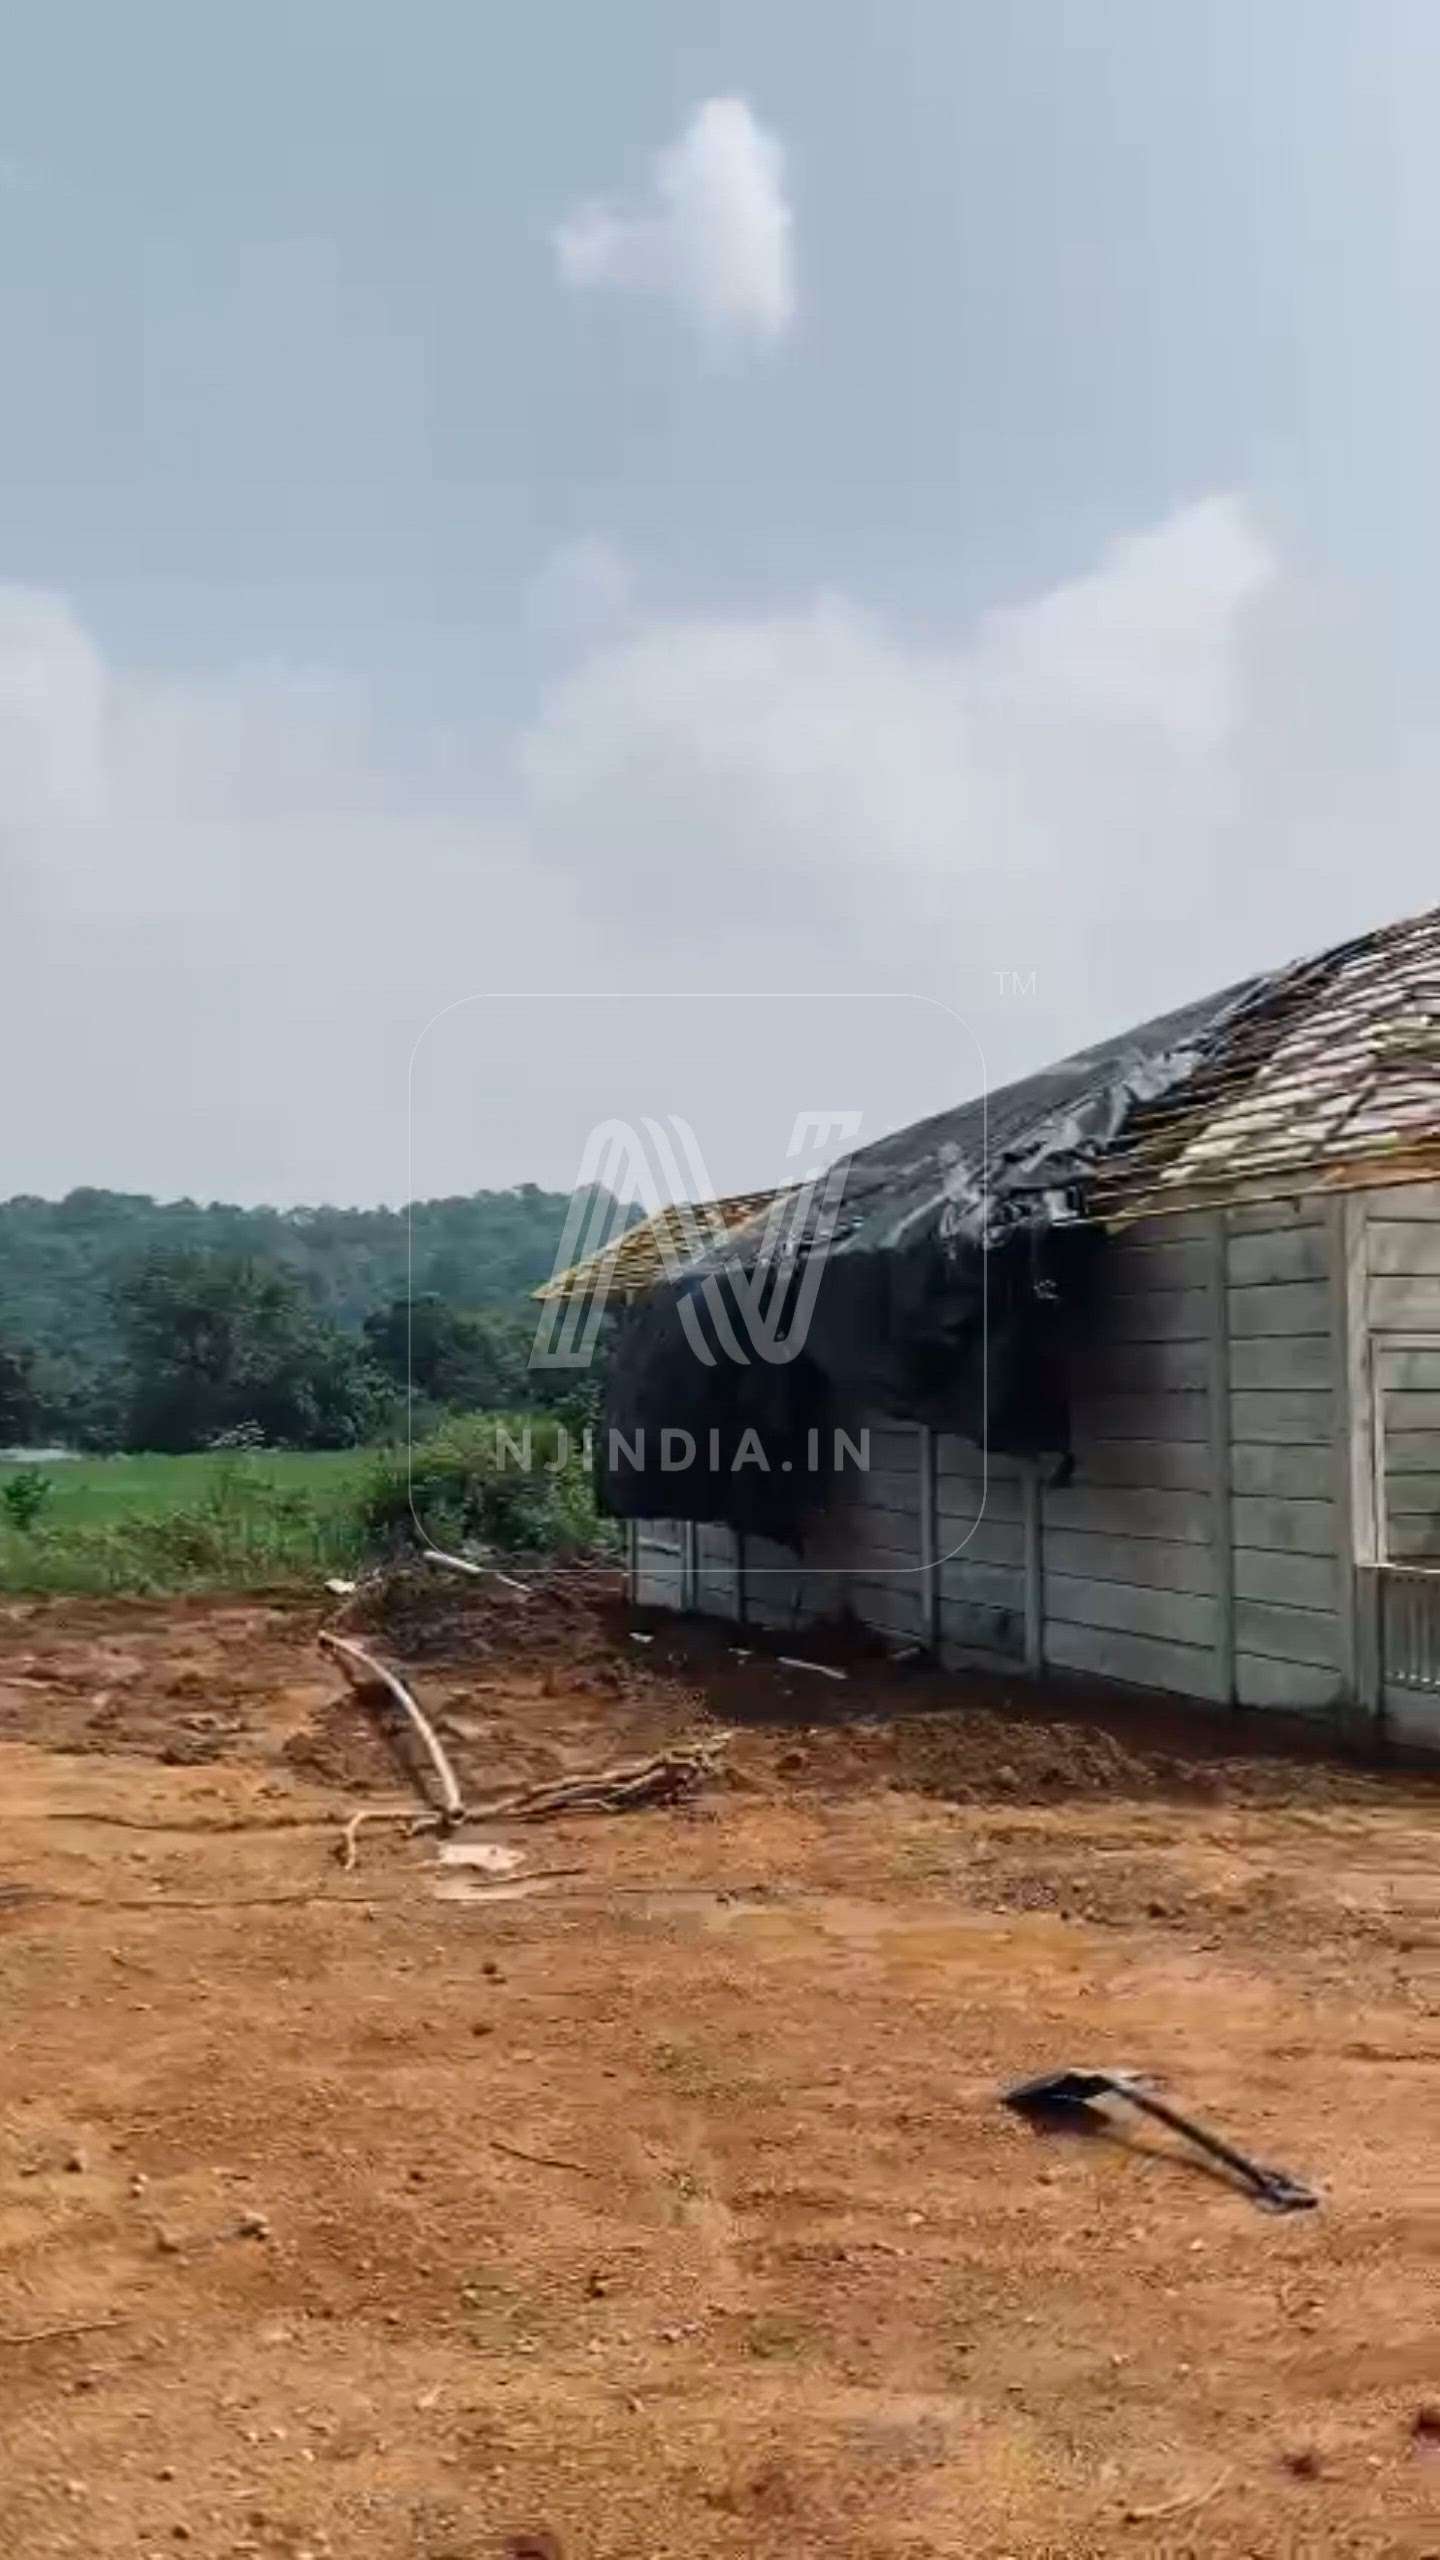 Reaching New Heights: Our Ongoing Roofing Project in Action🦾🏠🙀
NJINDIA YOUR COMPLETE ROOFING SOLUTION PARTNER 🤩✨
.🅦︎🅗︎🅐︎🅣︎🅢︎🅐︎🅟︎🅟︎ : https://wa.me/+919778690849 , https://wa.me/+918136832333 visit our website👉www.njindia.in
..
.


.
#RoofingIdeas #RoofingShingles #roofingservices #roofingtile #roofingcompanies #roofingcompany #roofingshinglesinkerala #bestroofingtiles #bestroofingshingles #kolotrending #koloapp